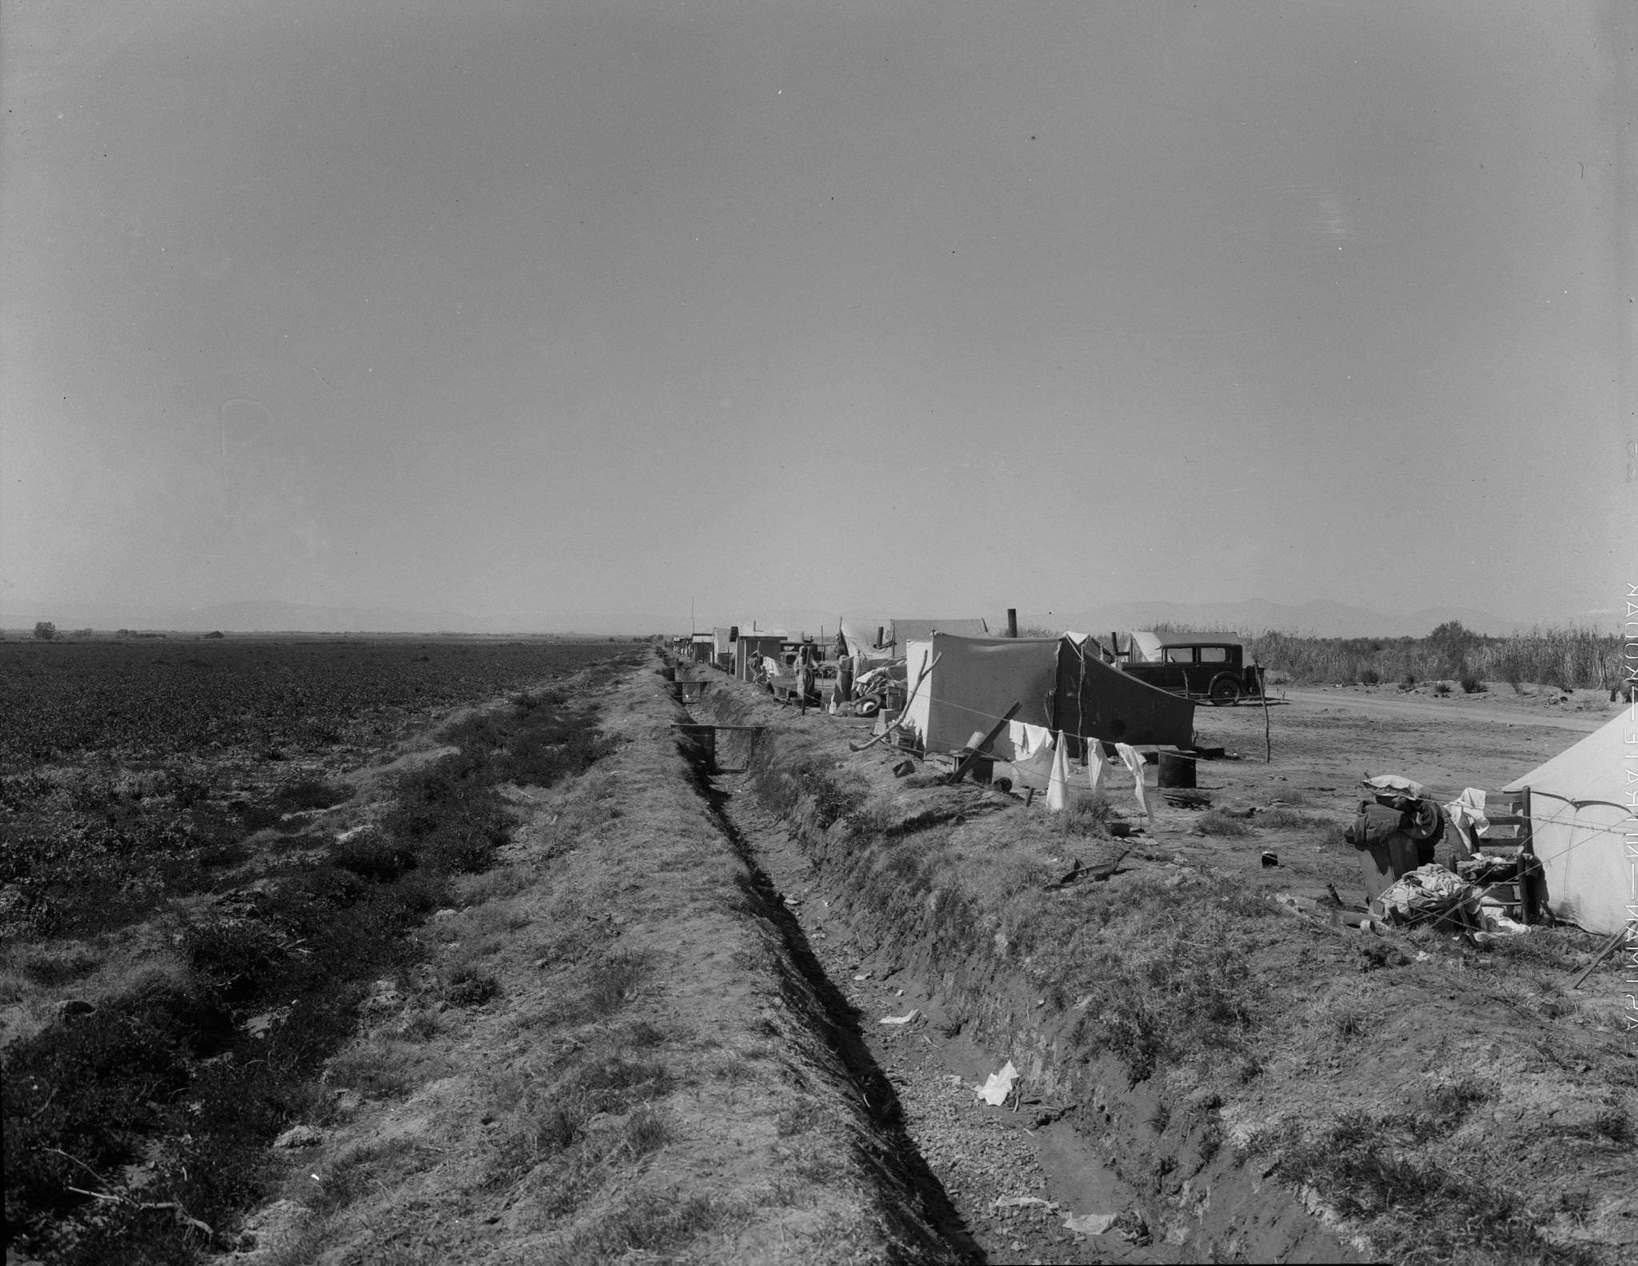 Squatter camp on county road near Calipatria, 1933. Forty families from the dust bowl have been camped here for months on the edge of the pea fields.